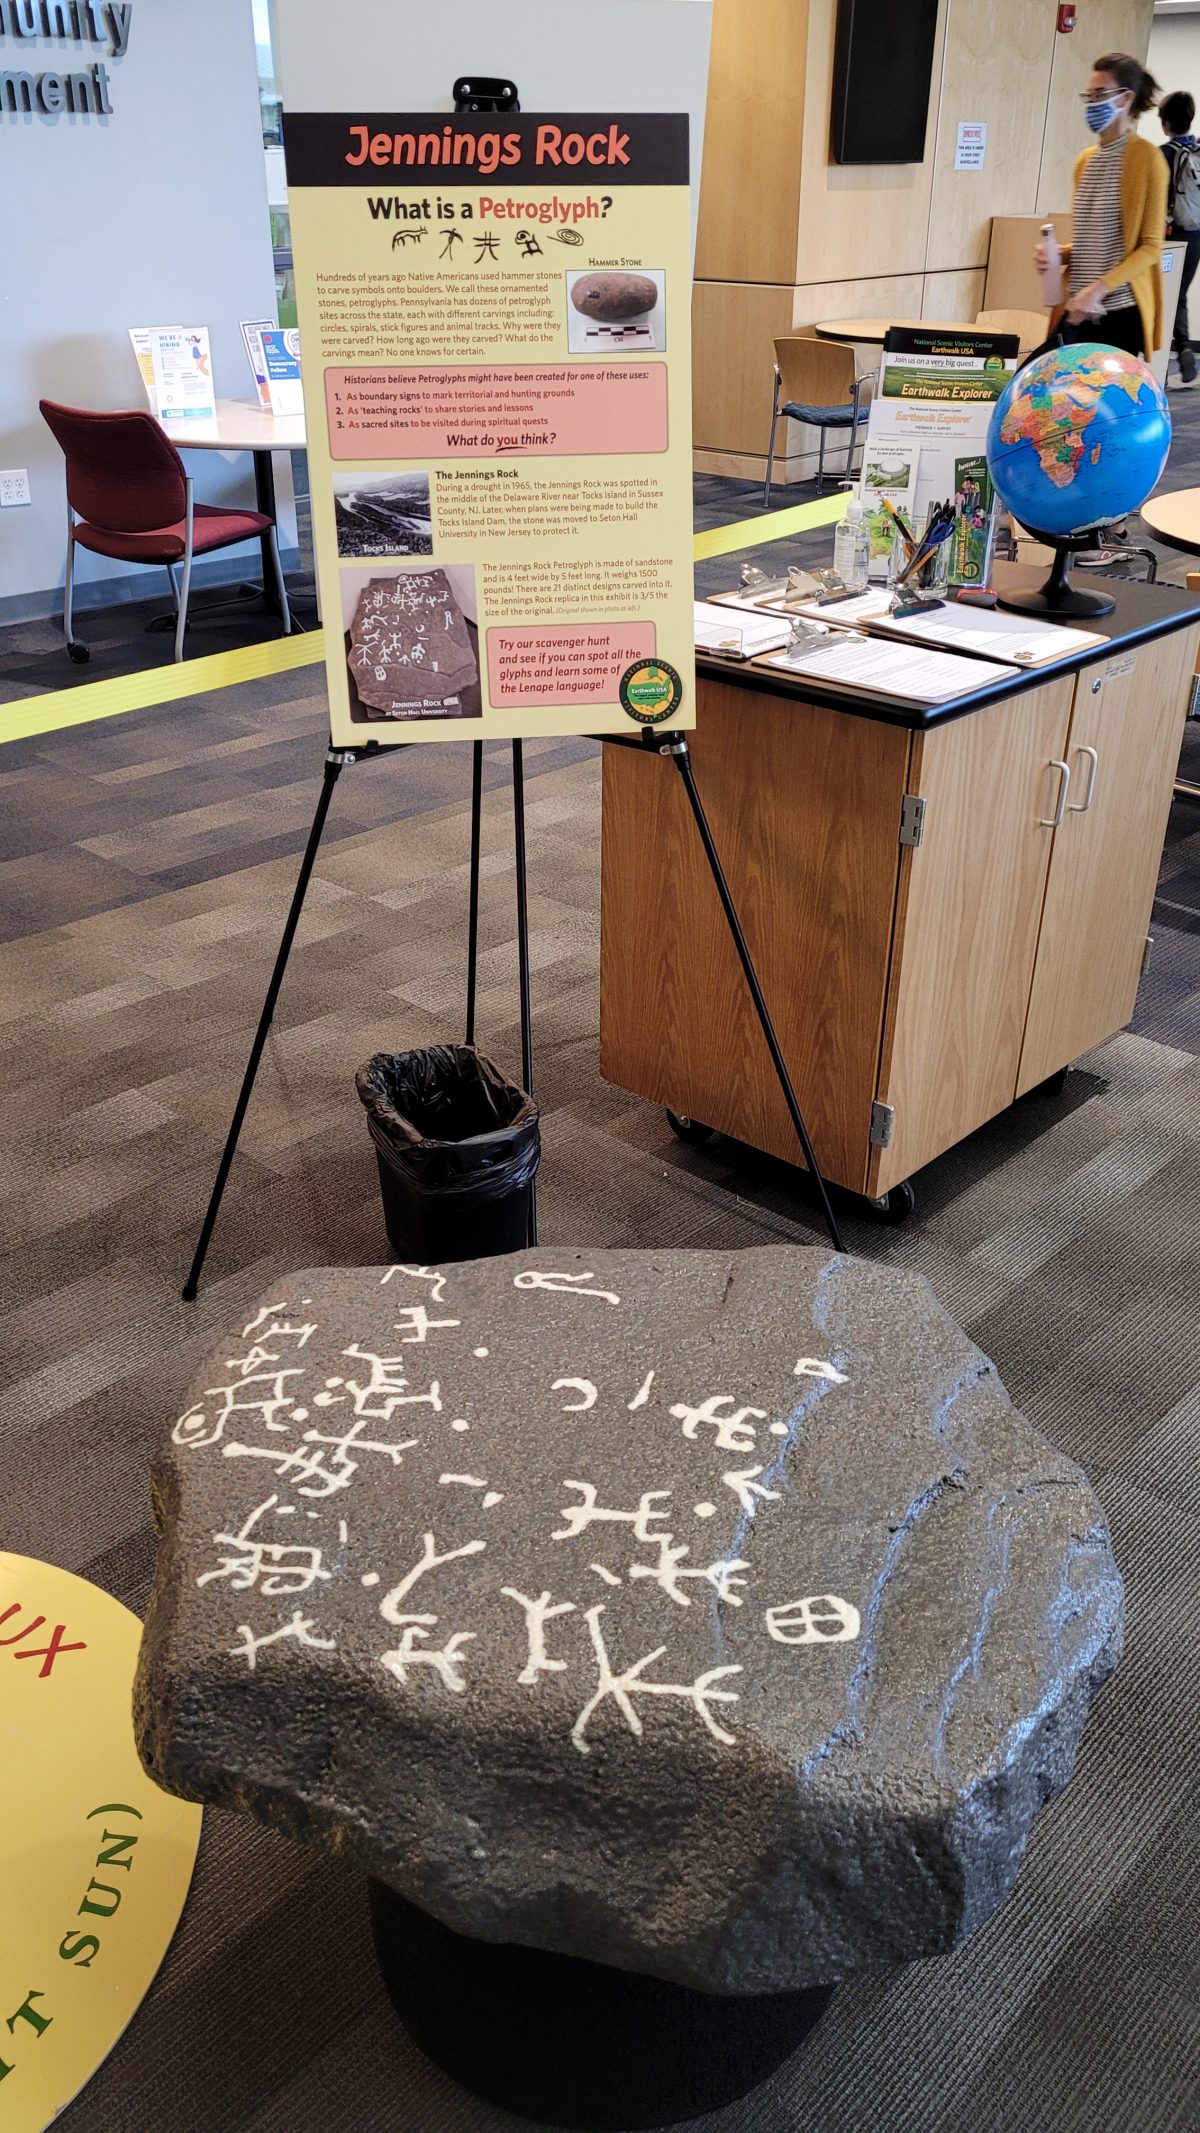 PETROGLYPH FEATURED IN TRAVELING EXHIBITION